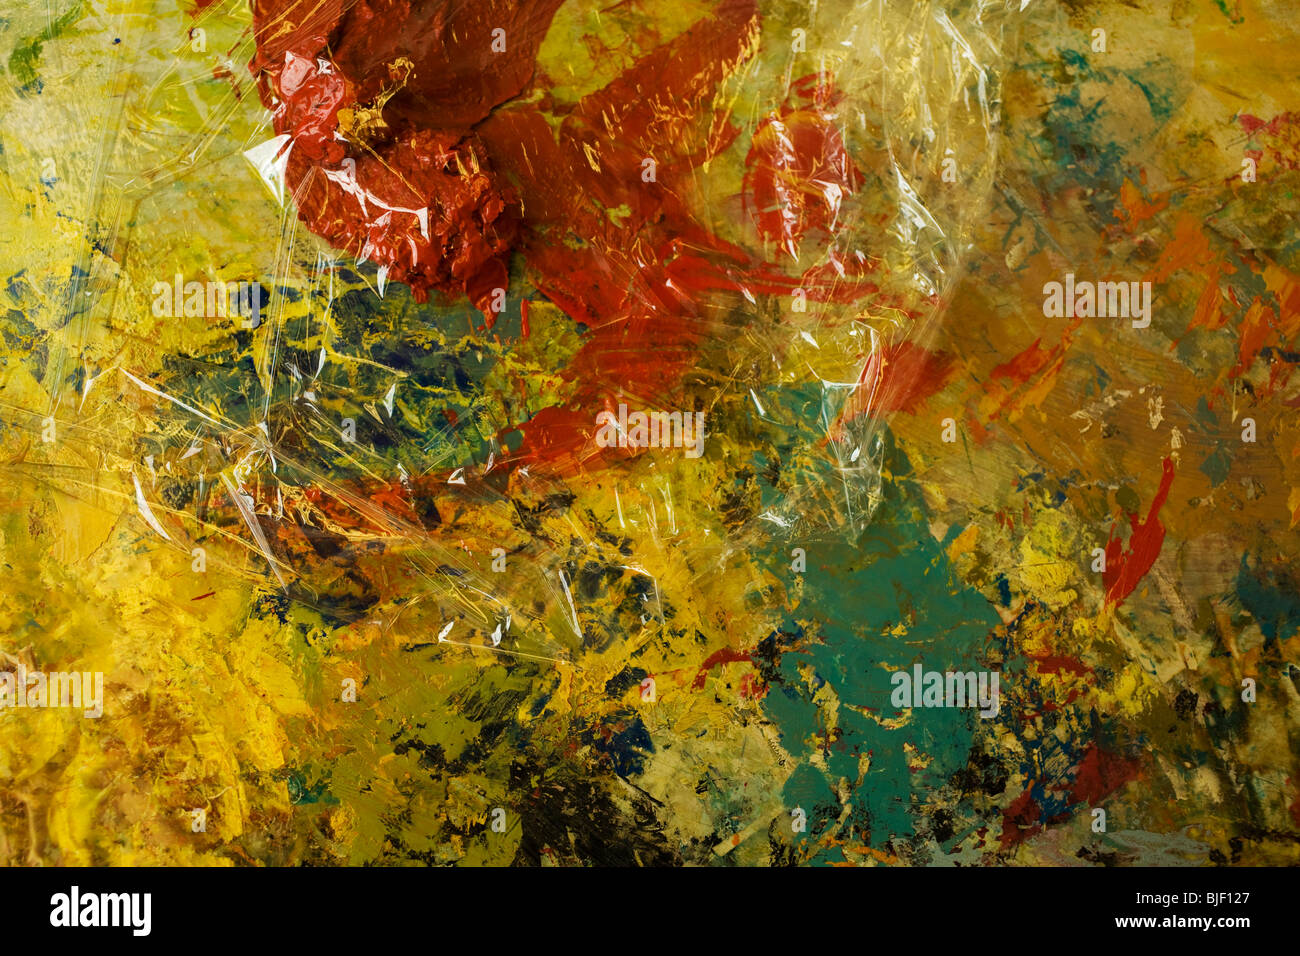 Artist palette shows shows a large blob of red paint covered with cellophane. Stock Photo